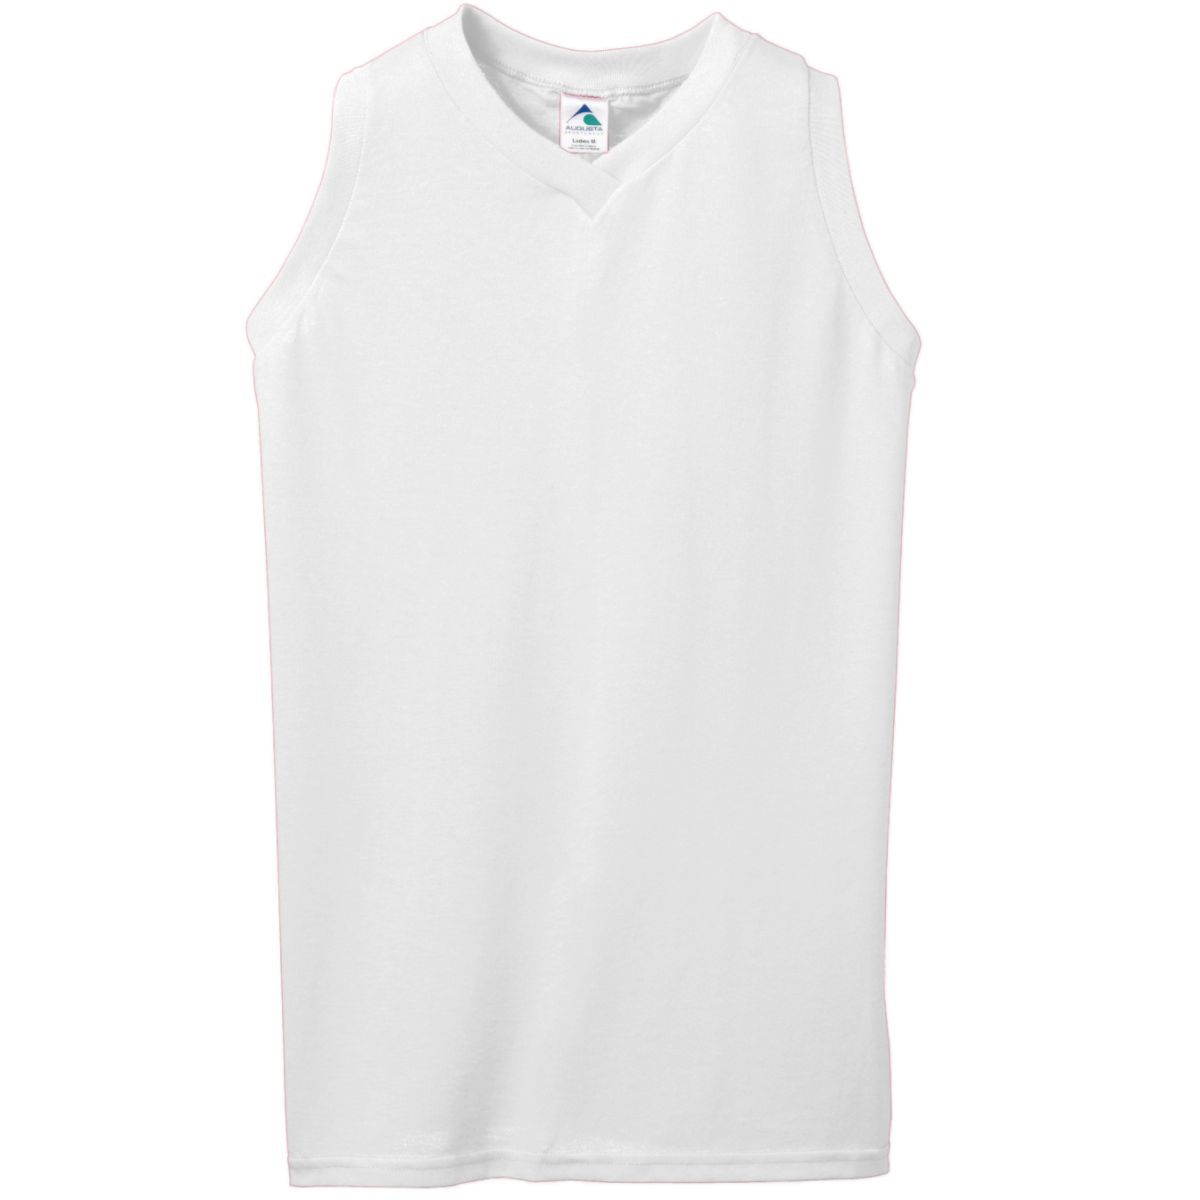 Augusta Sportswear Ladies Sleeveless V-Neck Poly/Cotton Jersey in White  -Part of the Ladies, Ladies-Jersey, Augusta-Products, Tennis, Shirts product lines at KanaleyCreations.com